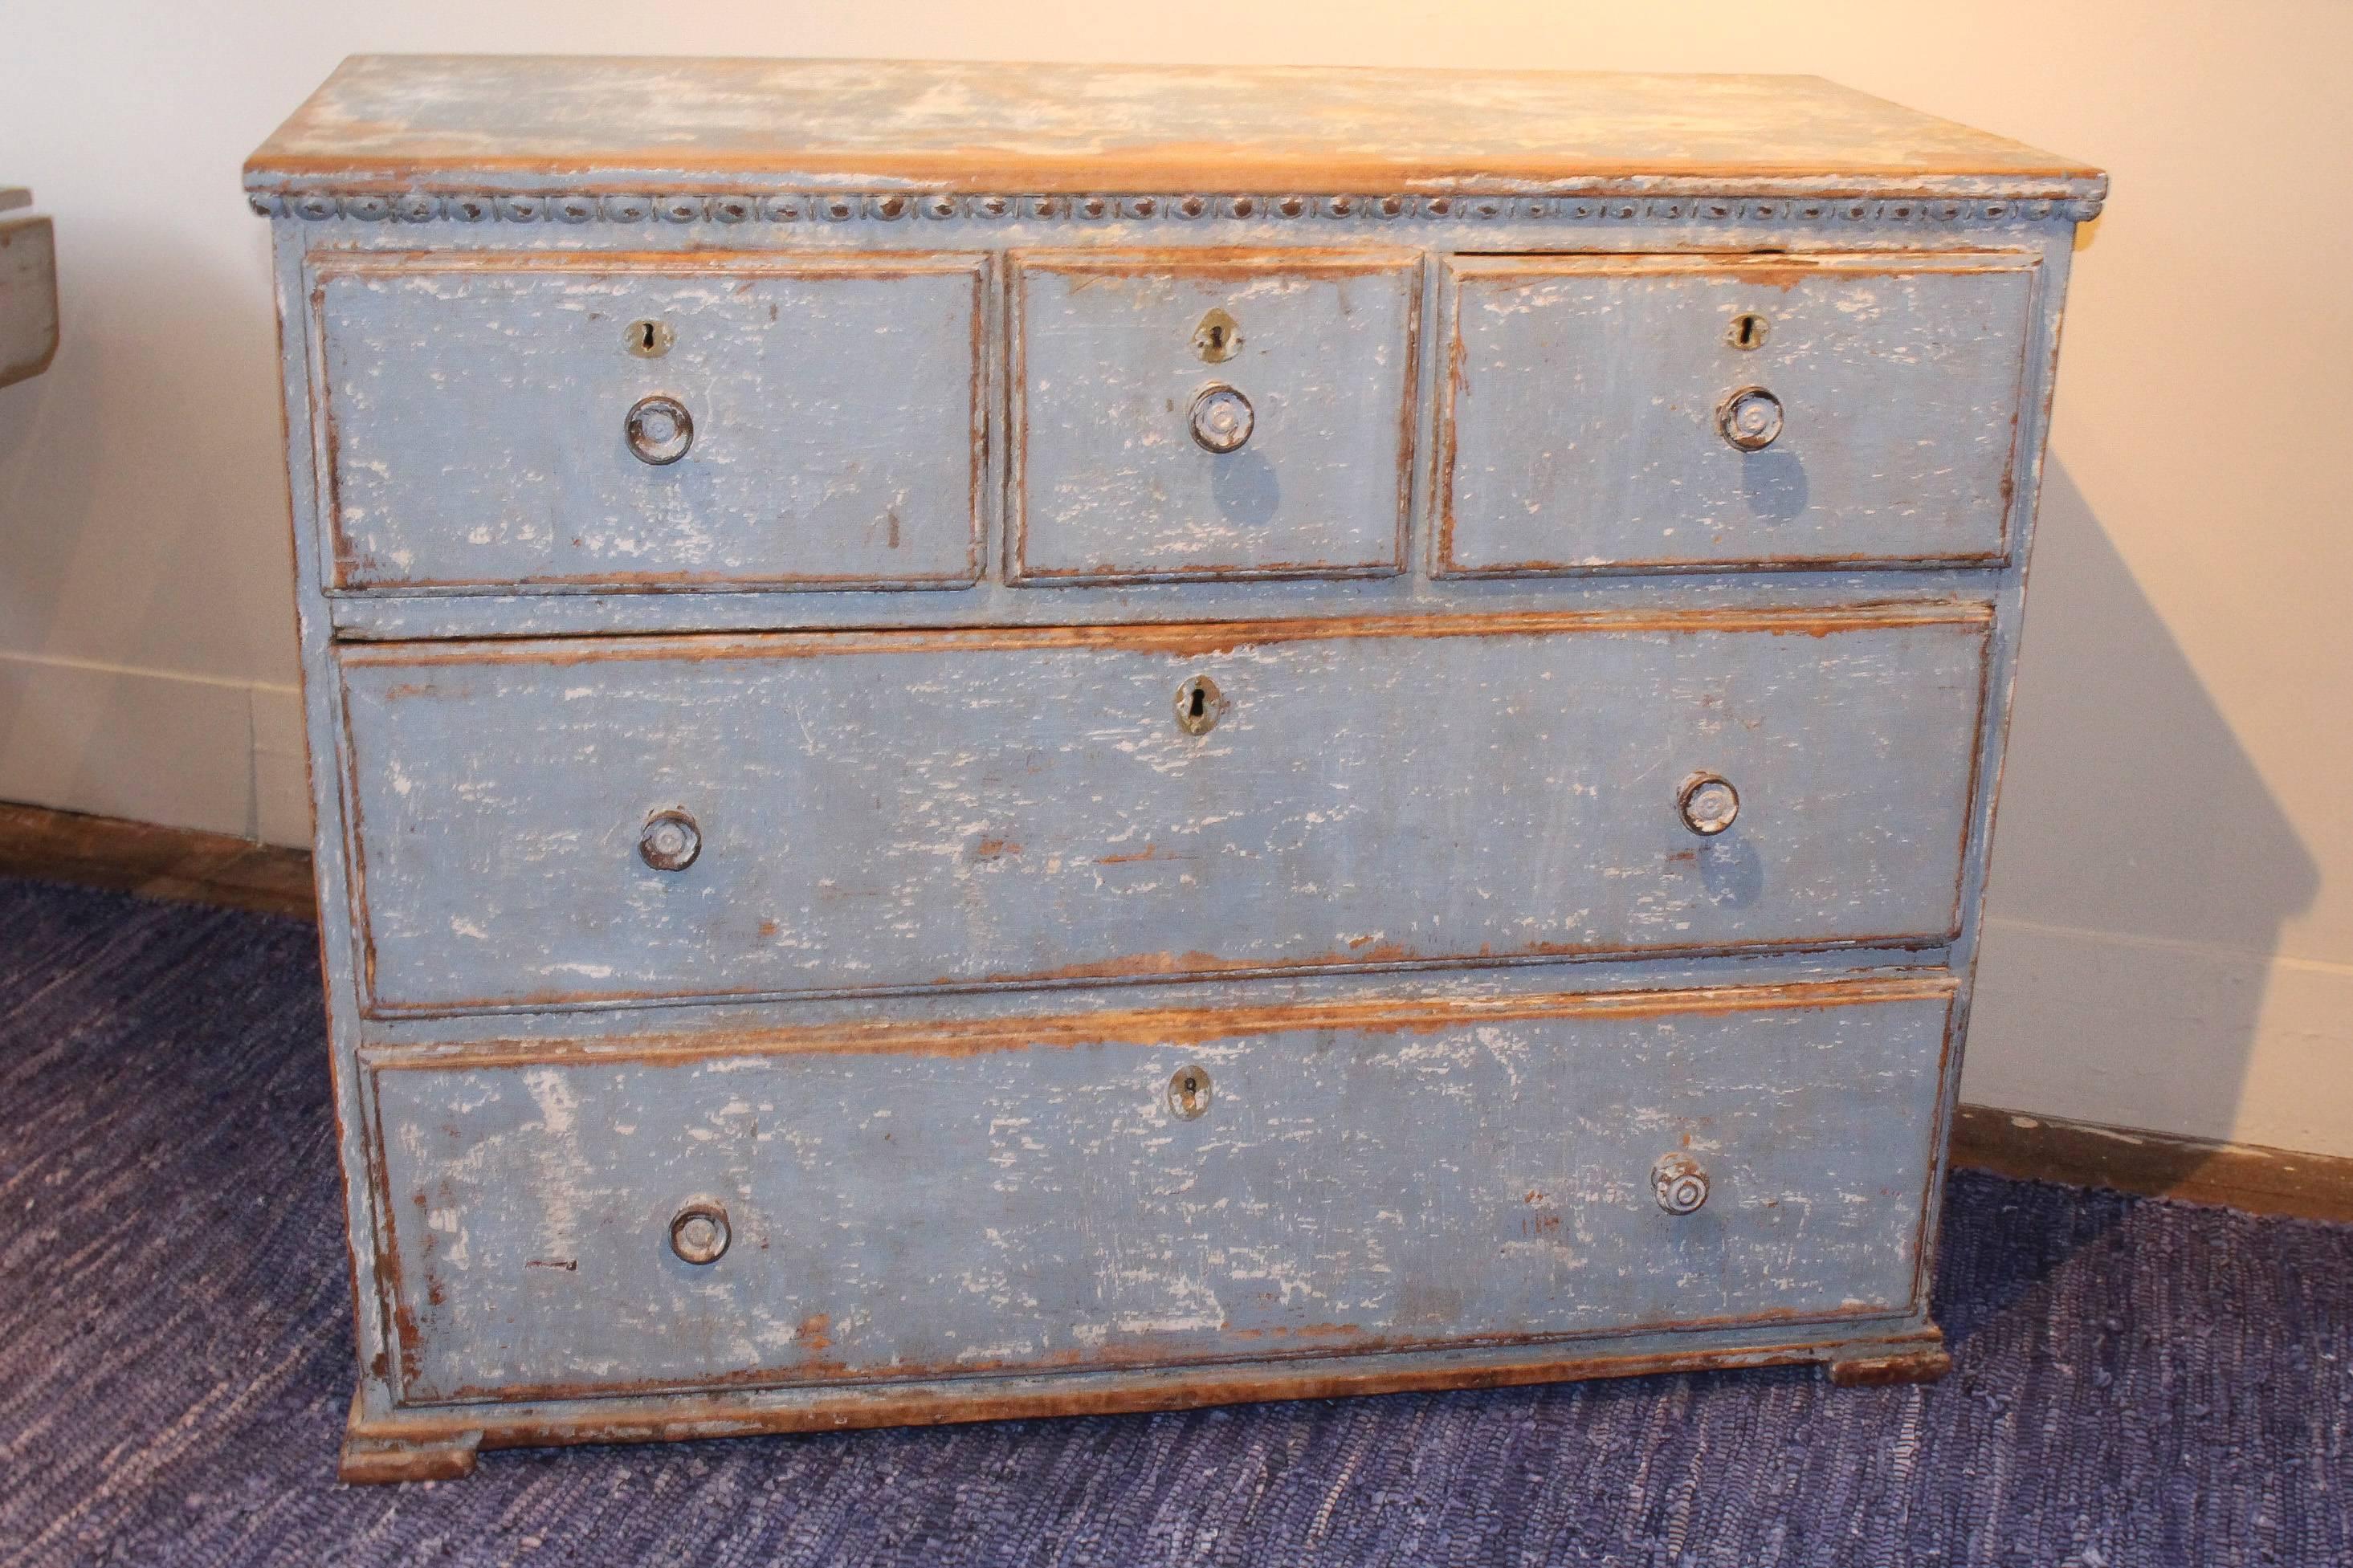 Painted chest, 19th century Portugal, with three smaller side-by-side drawers over two full-length drawers, all with self knob pulls. Chest is in original blue paint with distressed appearance that shows its age. Unusual moulding and stepped feet